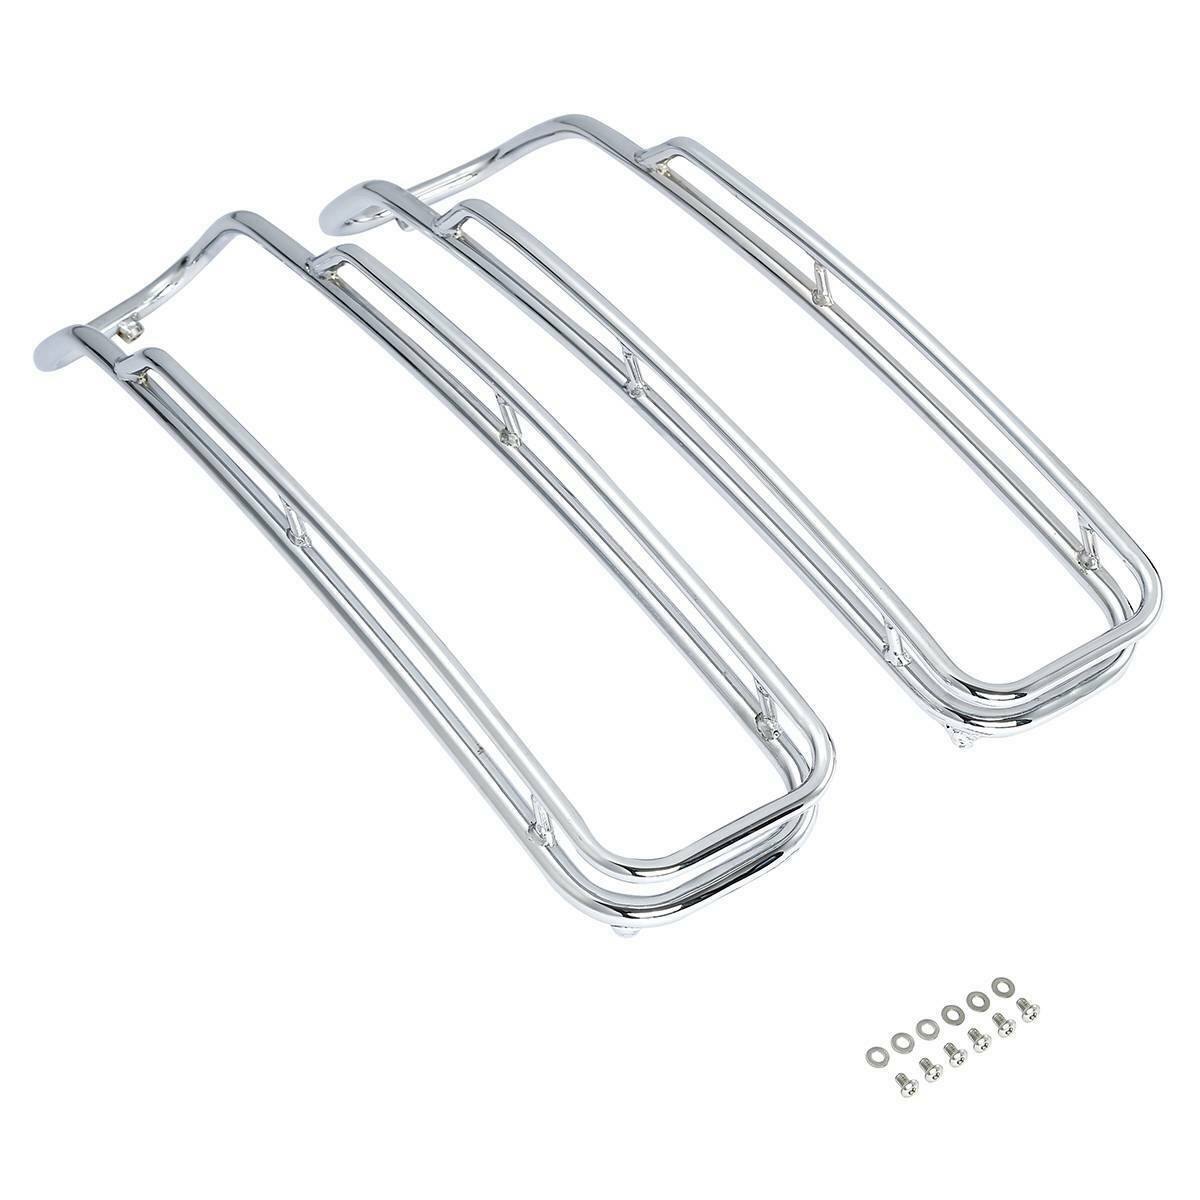 Saddlebags Lid Top Rail Guards Fit For Harley Touring Road King 14-21 Chrome - Moto Life Products